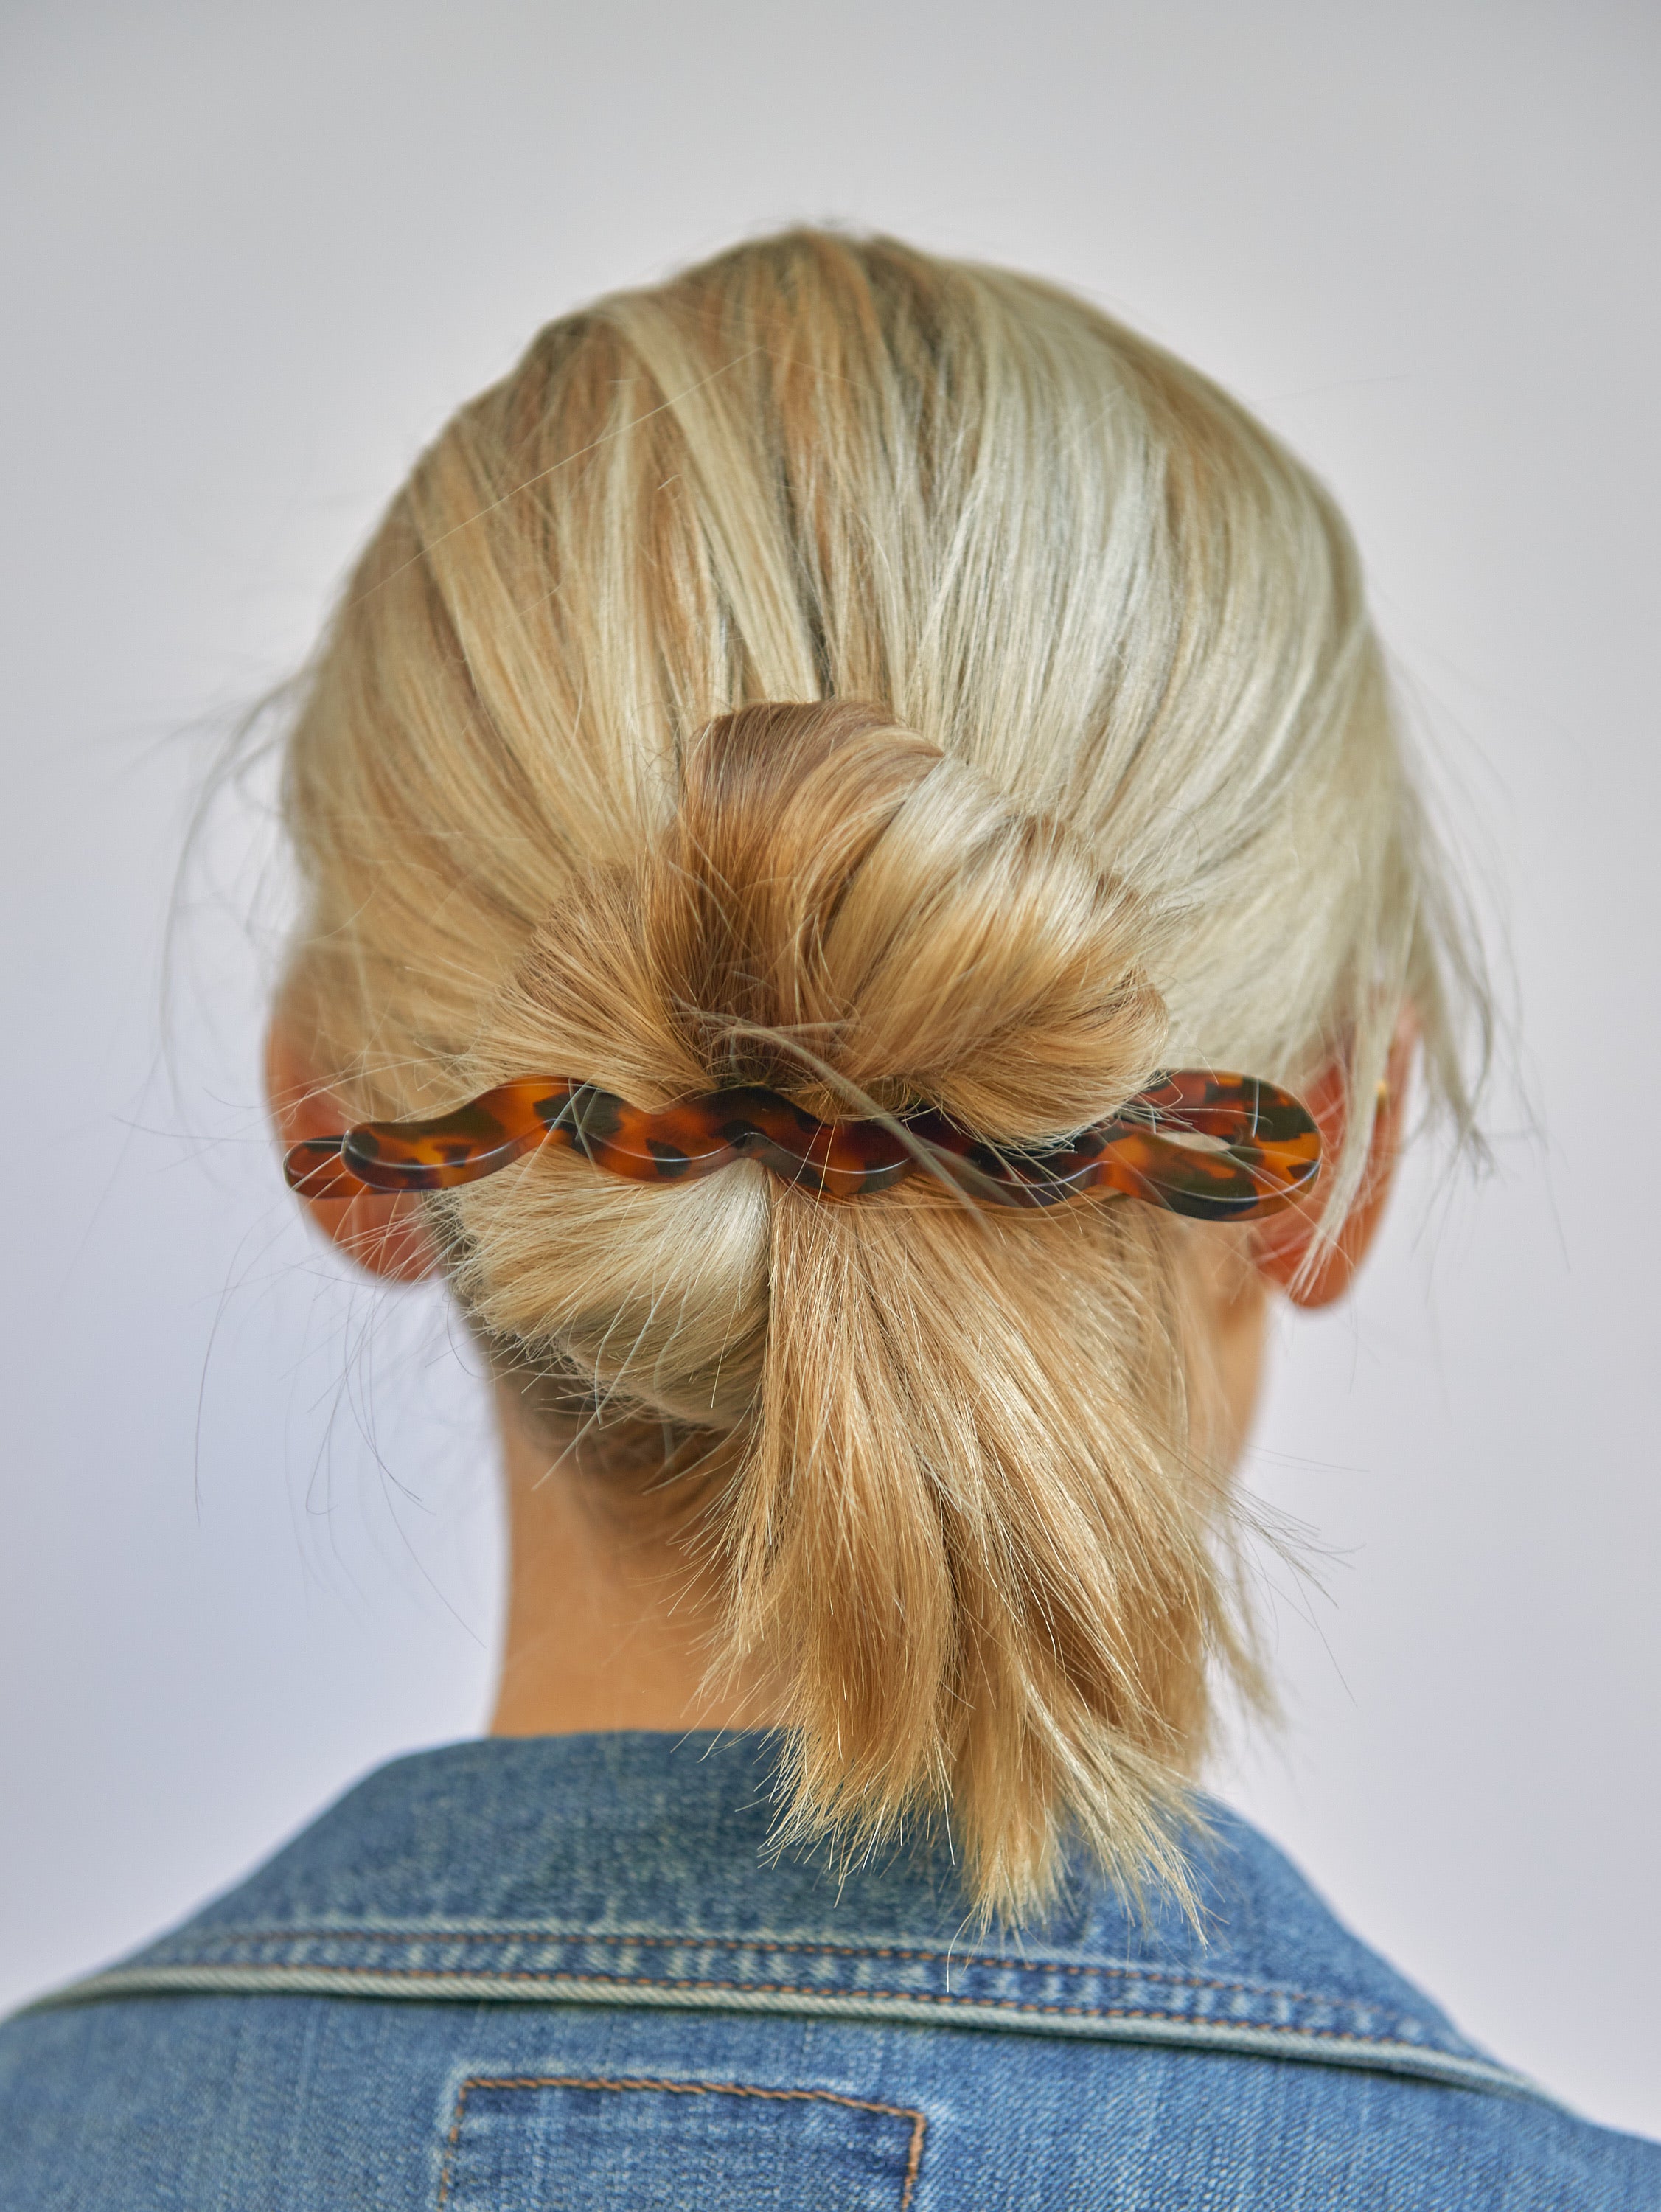 13 Bobby Pin Hairstyles You Can Do in 5 Minutes or Less | All Things Hair ZA